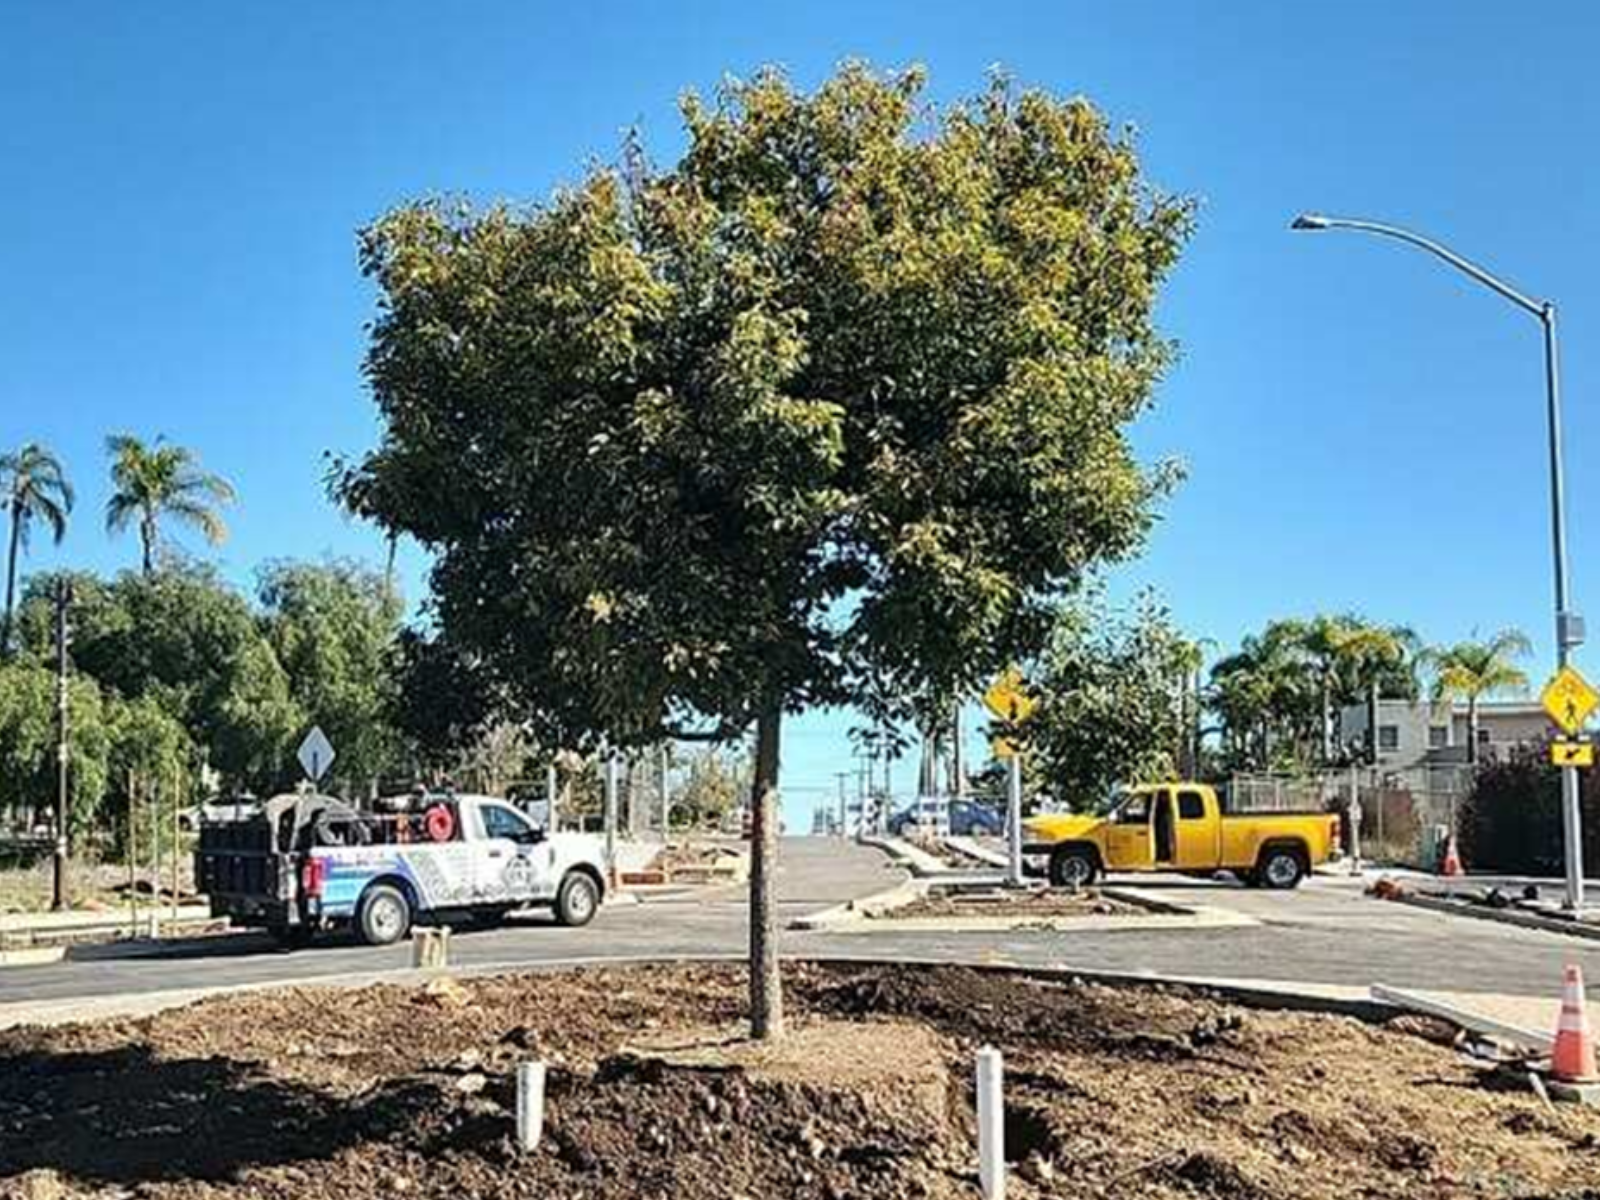 72” box tree planted at roundabout in Redwood Street 